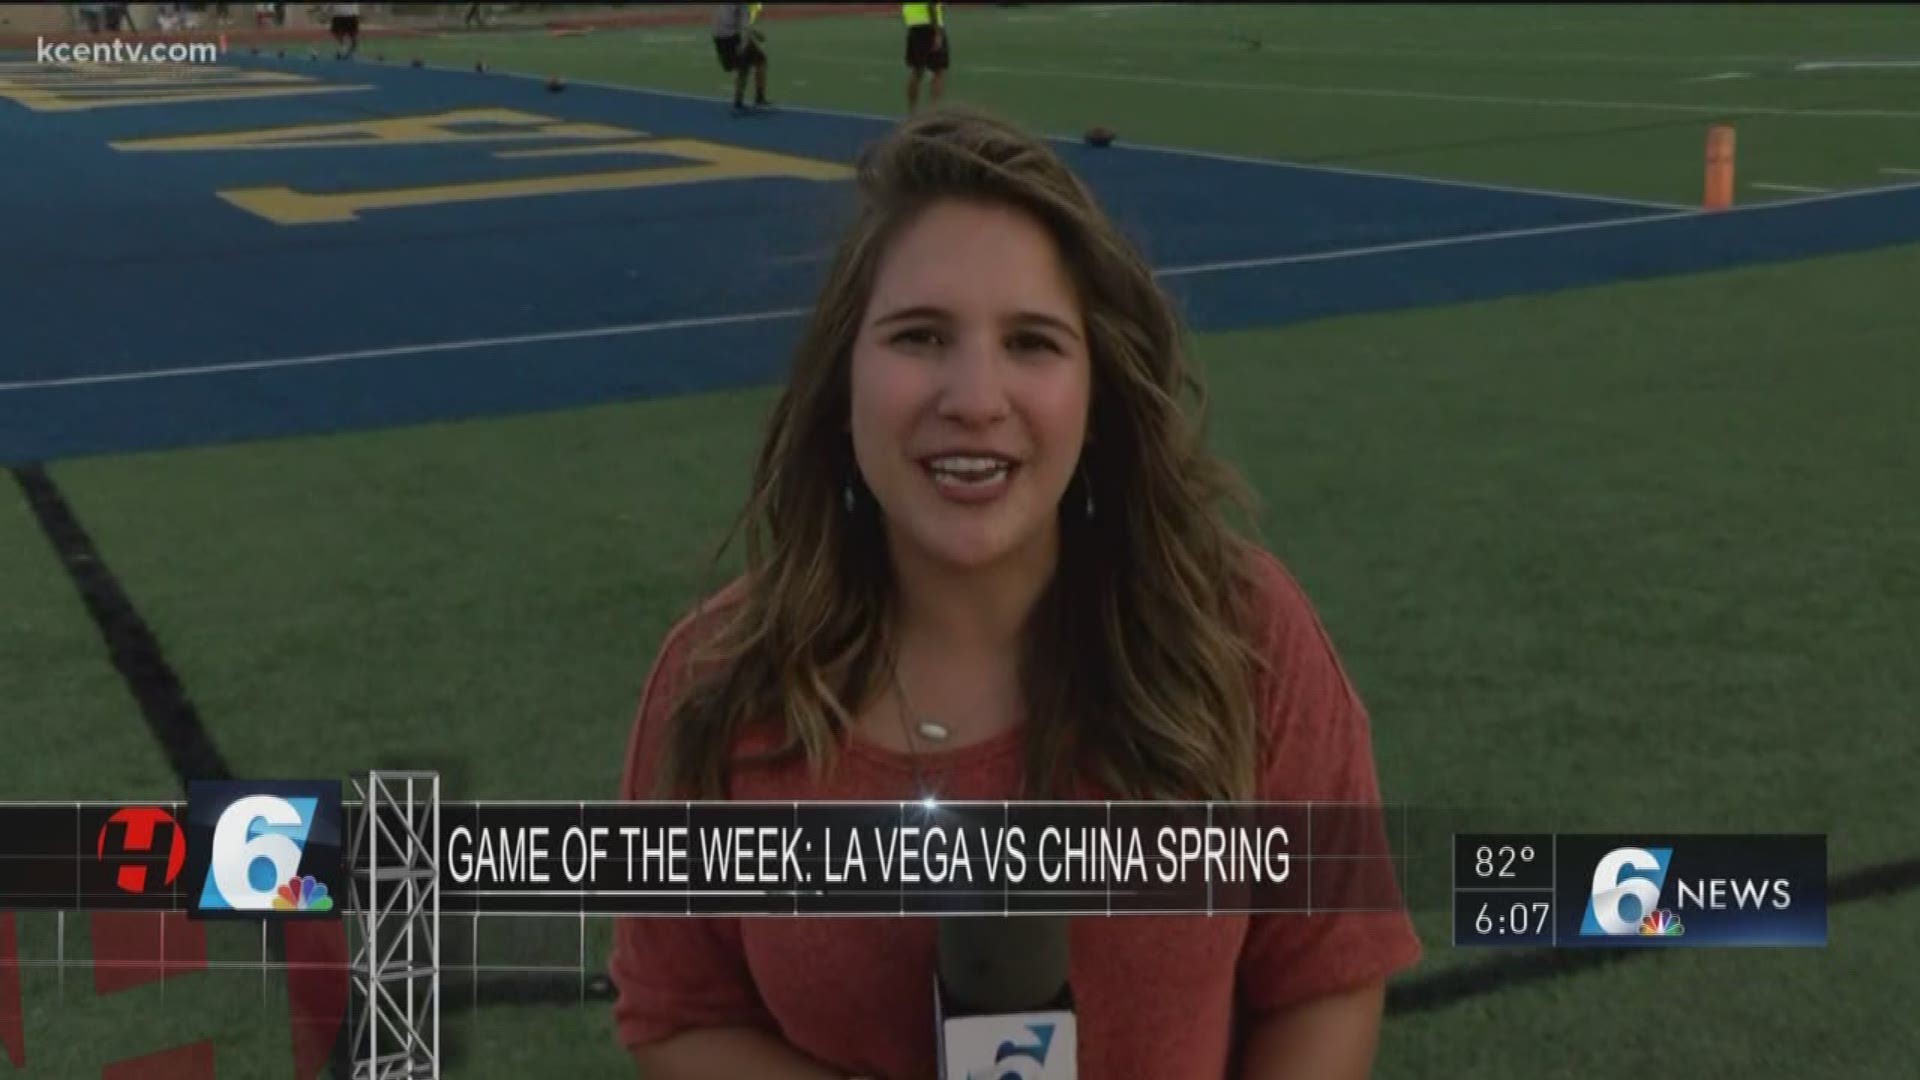 Channel 6 sports reporter Jessica Morrey reported live from Pirate Stadium.